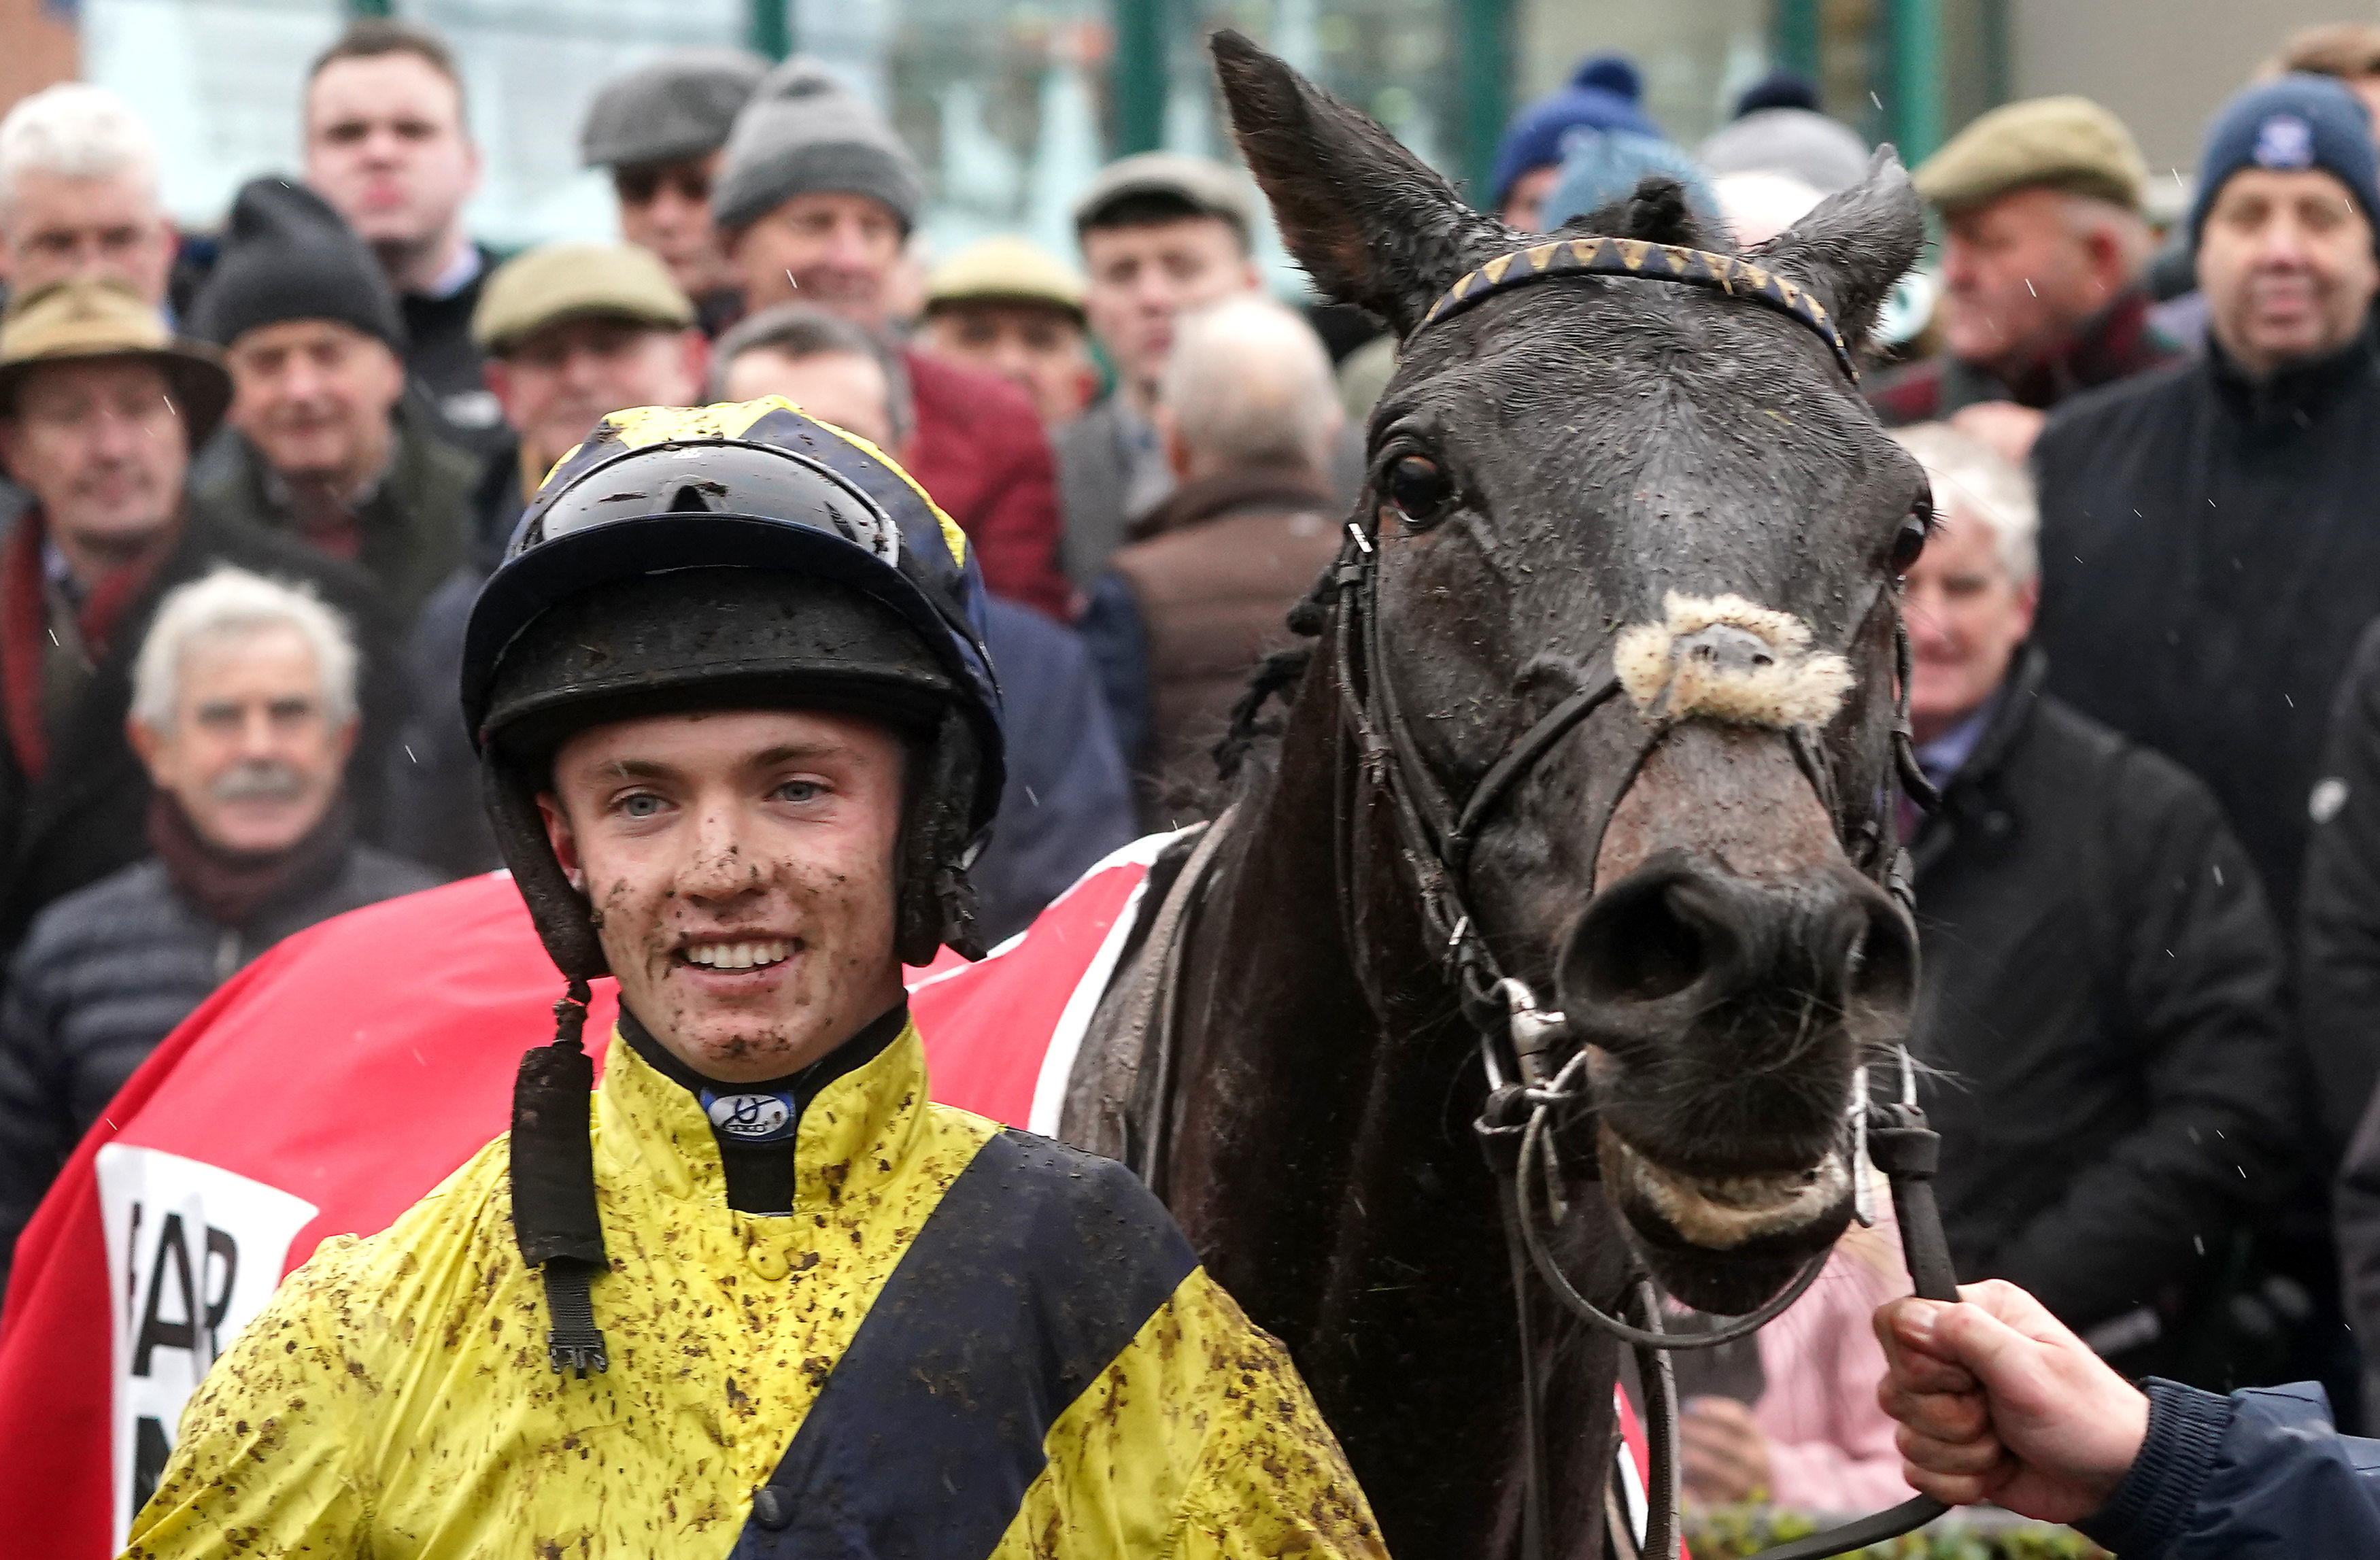 , Fans all say the same thing after watching jockey’s ‘obscene’ ride at Cork